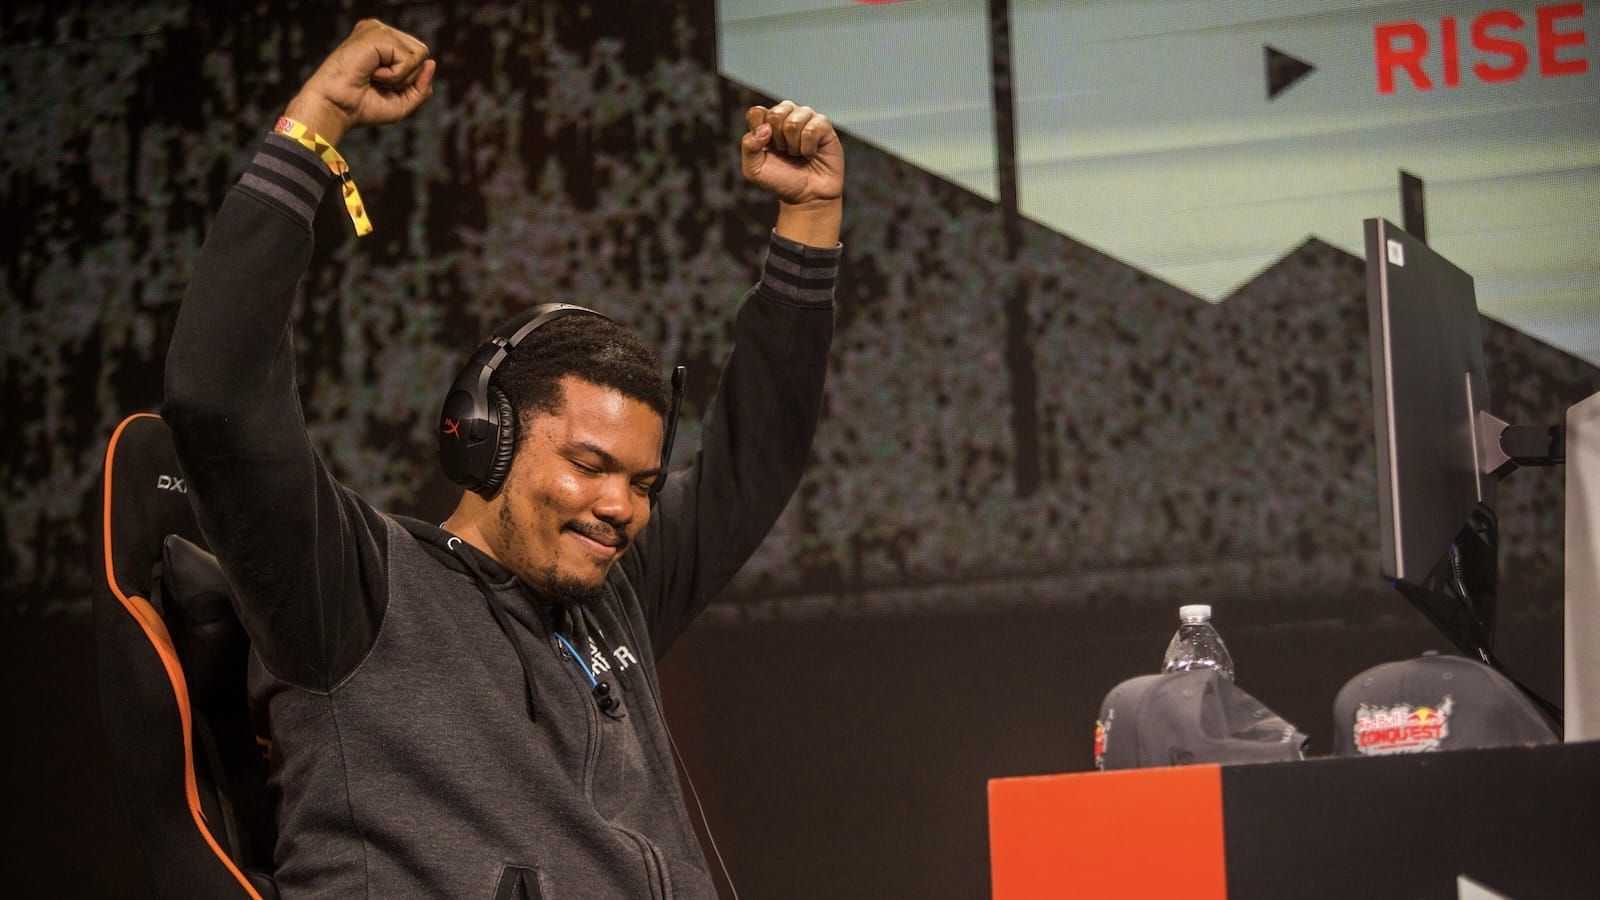 Fighting game player Hotashi on stage raises his arms up and looks down smiling after big play